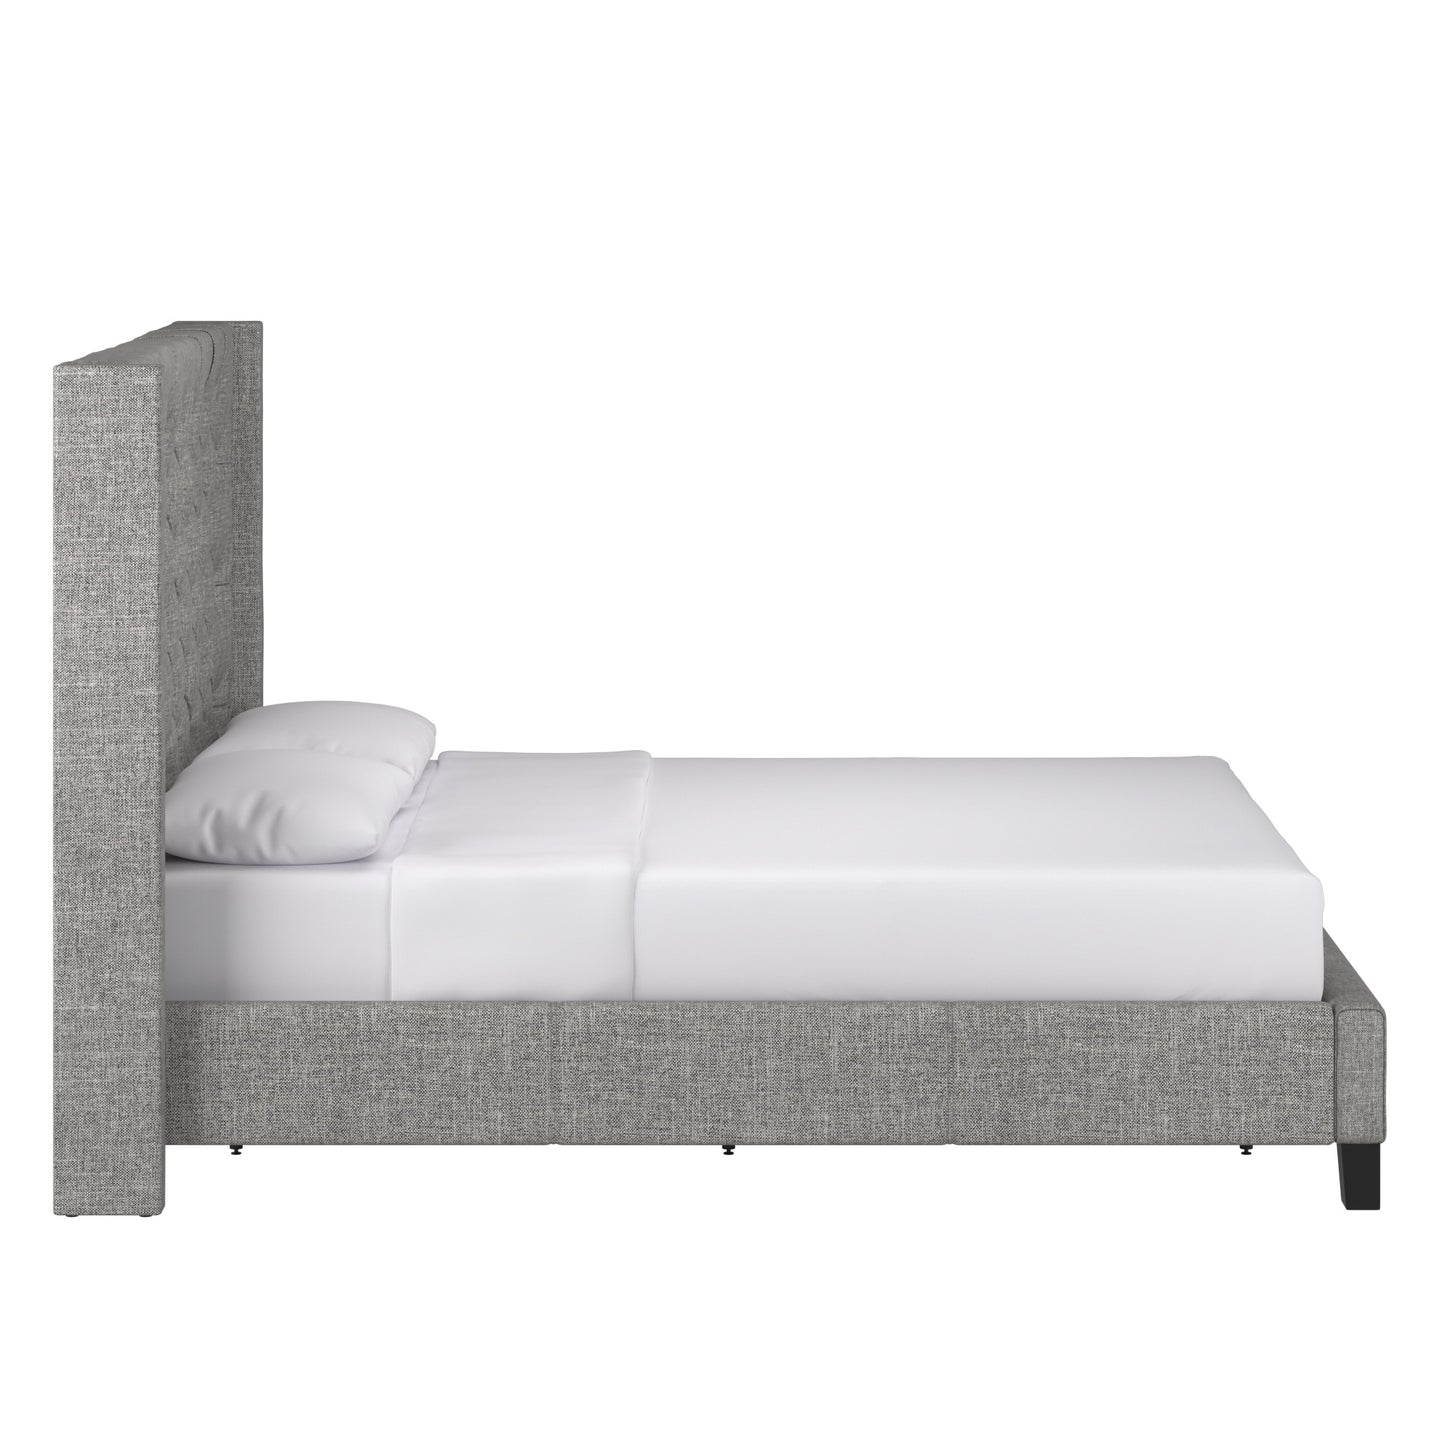 Wingback Button Tufted Bed - Grey Linen, Full